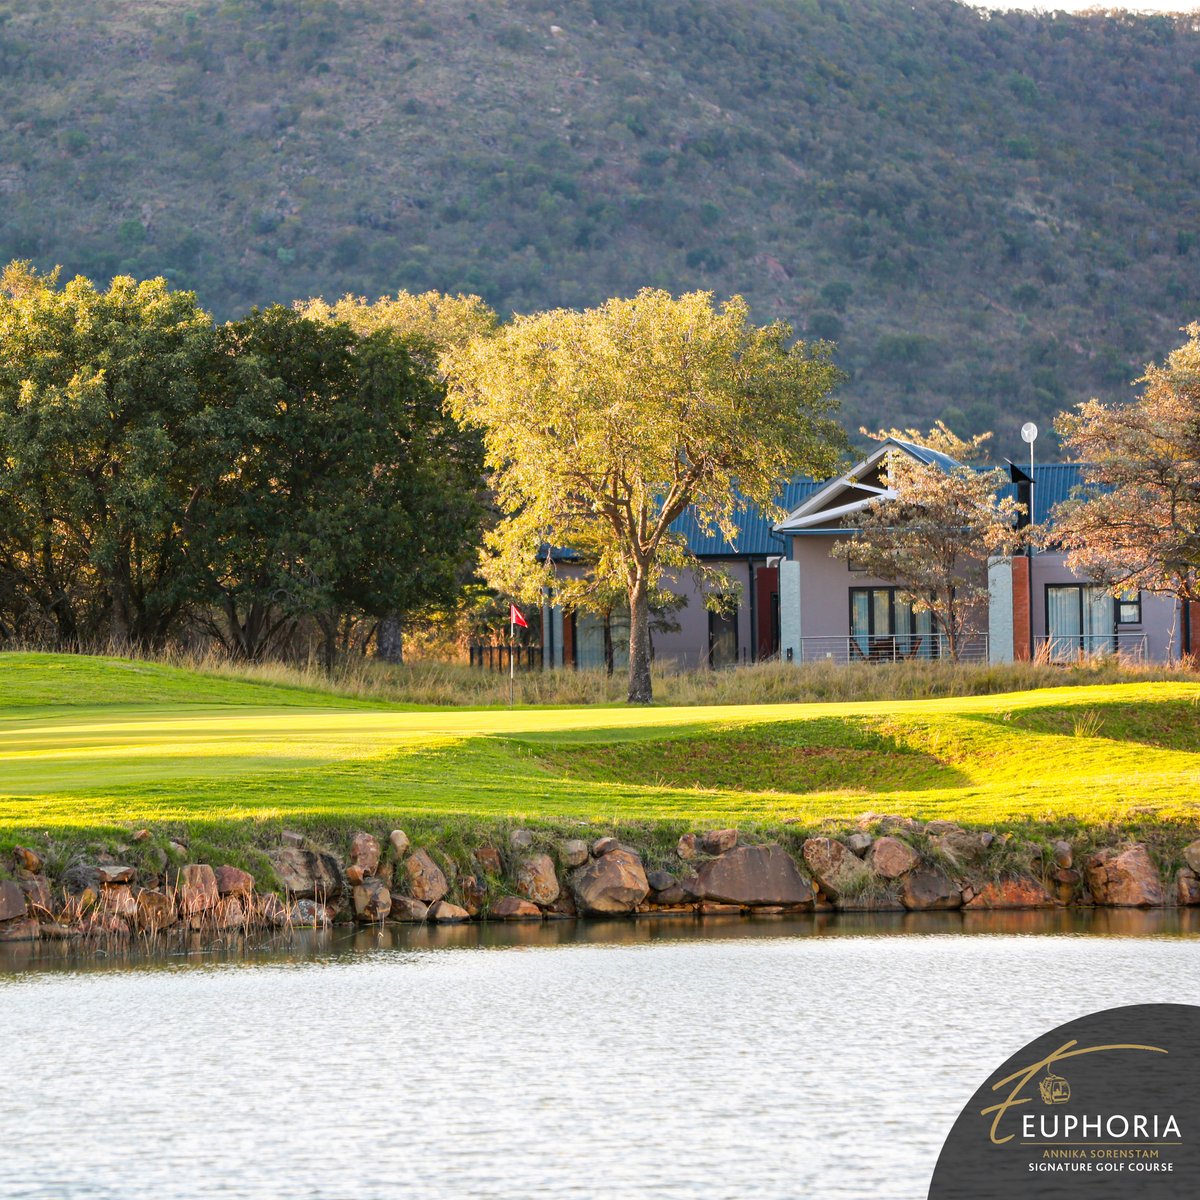 A special view from our signature house.

Email: info@euphoriahydro.co.za
Whatsapp: 082 076 6275
#euphoriagolfestate #luxuryresort #luxuryhotels #southafricanhotels #luxuryspa #weekendaway #weekendgetaway #weekendgetaways